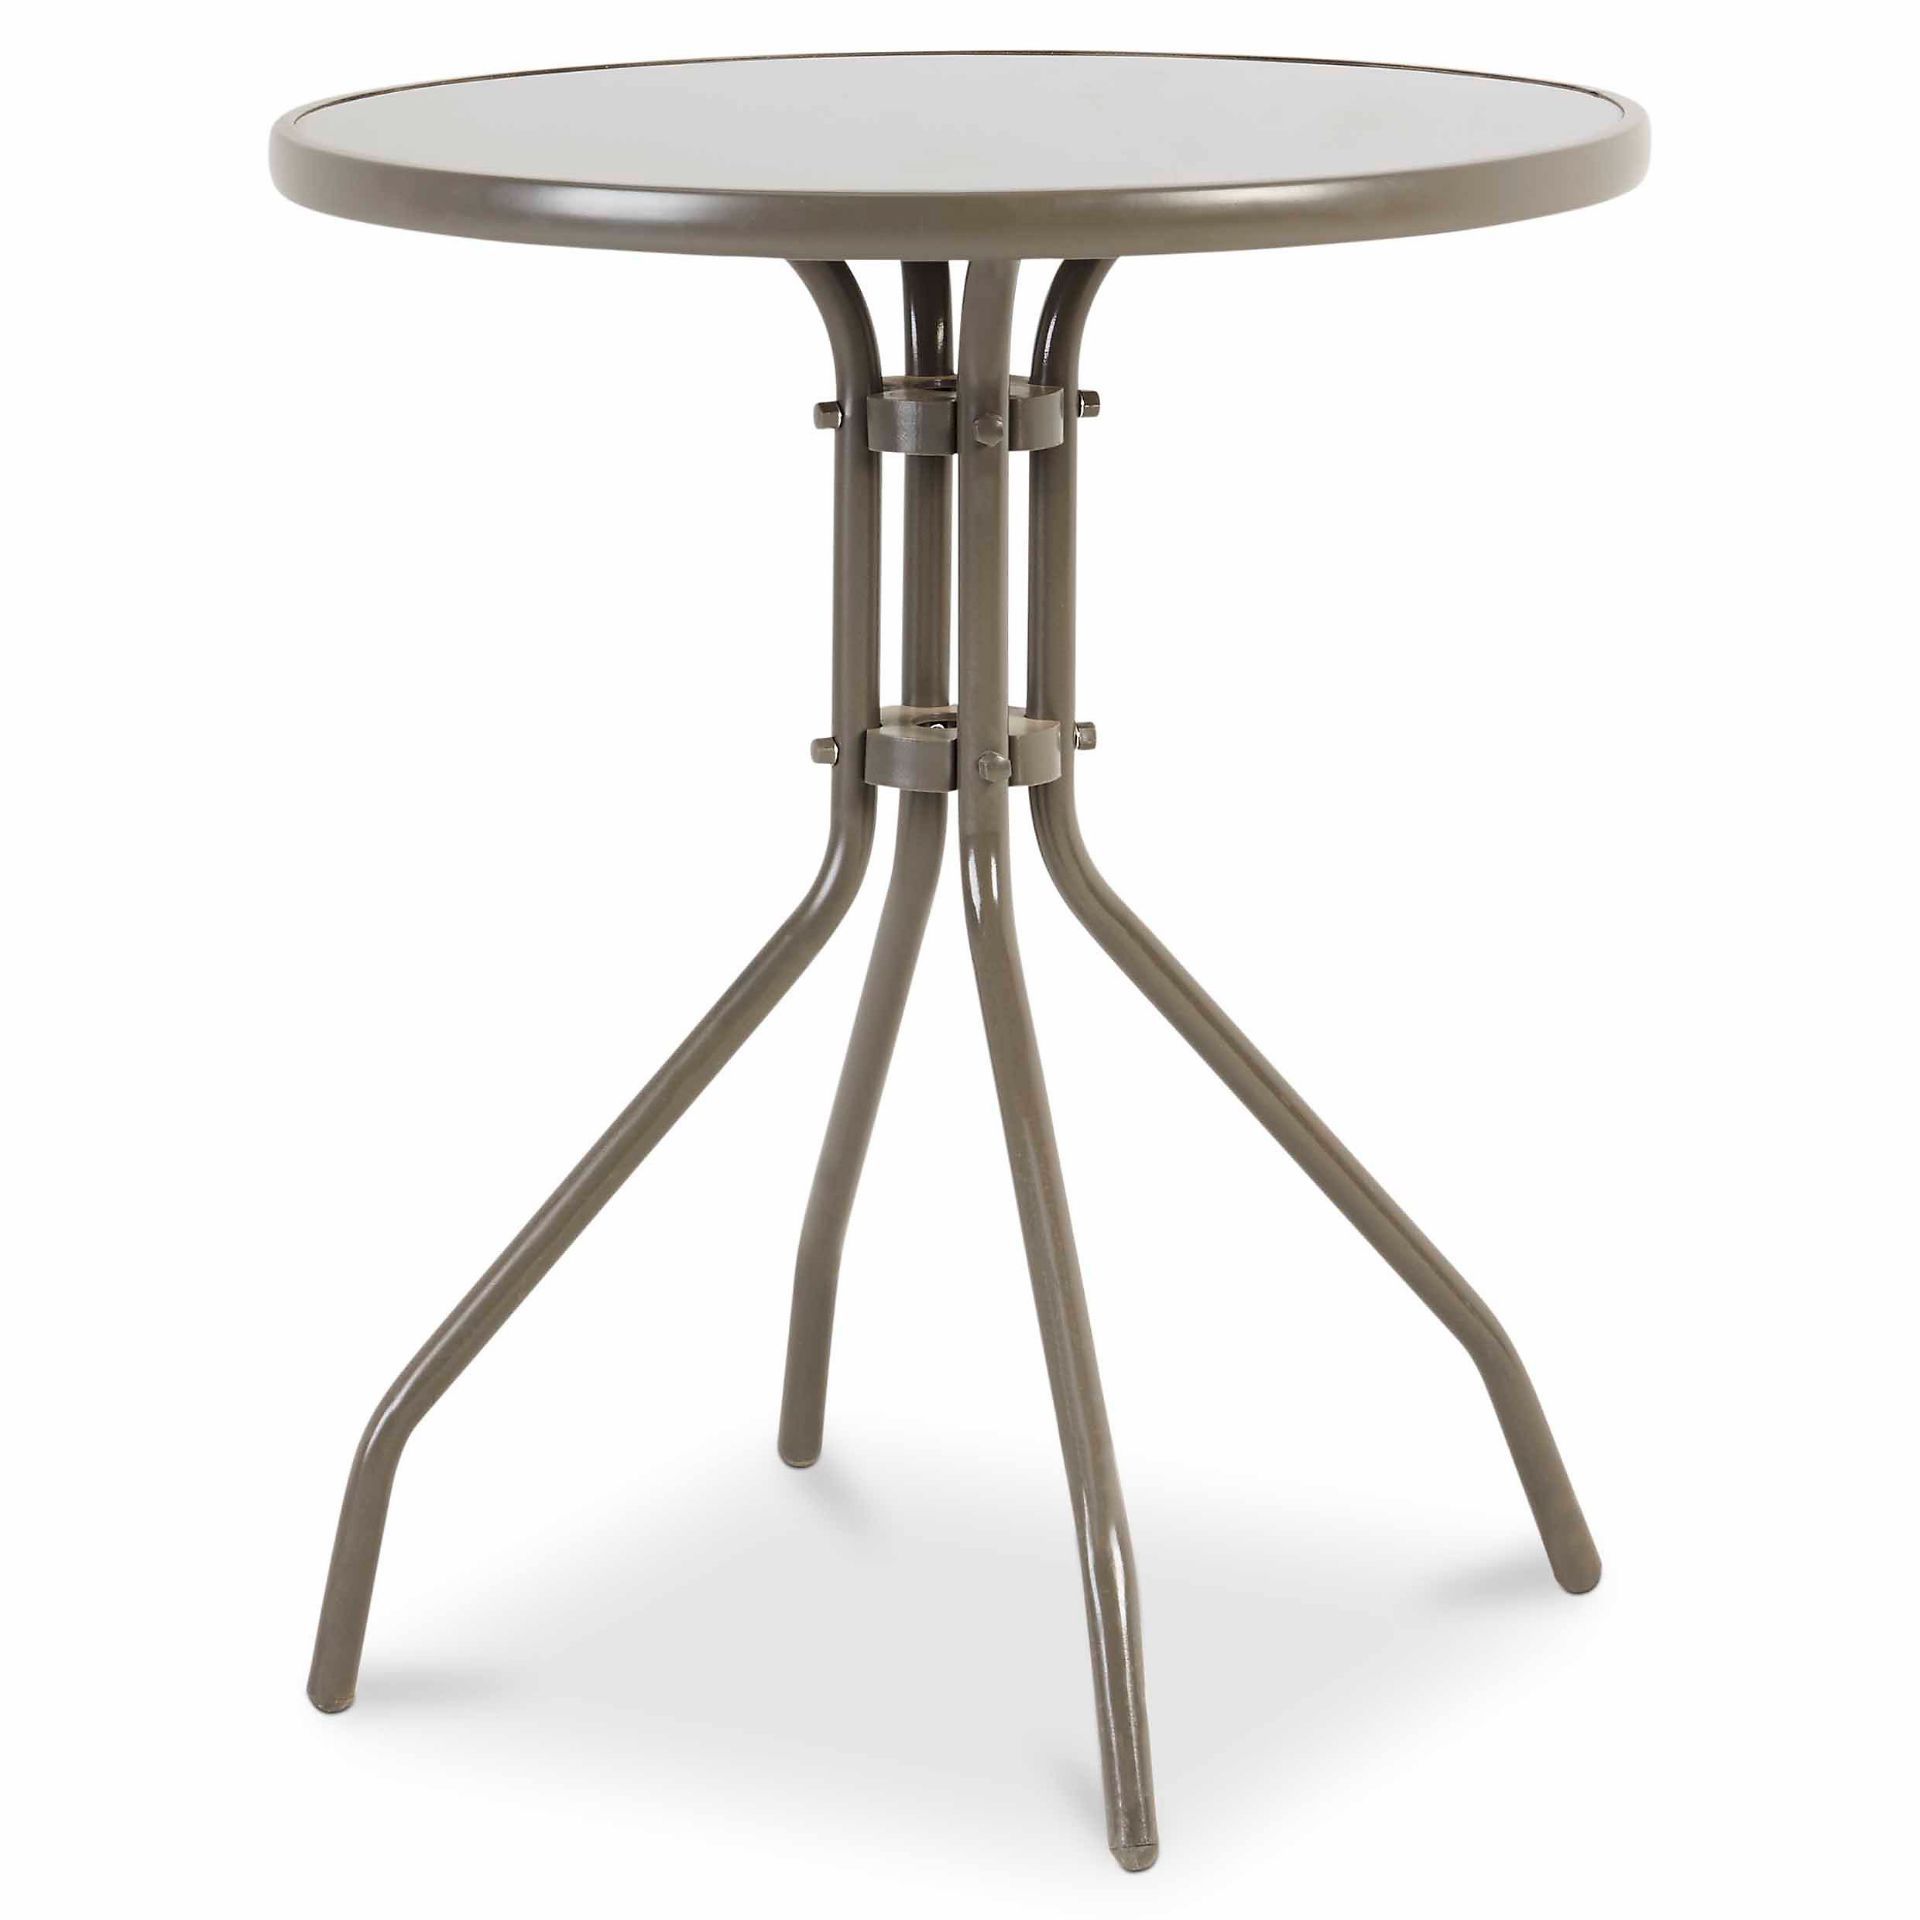 Grey Metal 2 Seater Table & Glass Top RRP £29.99